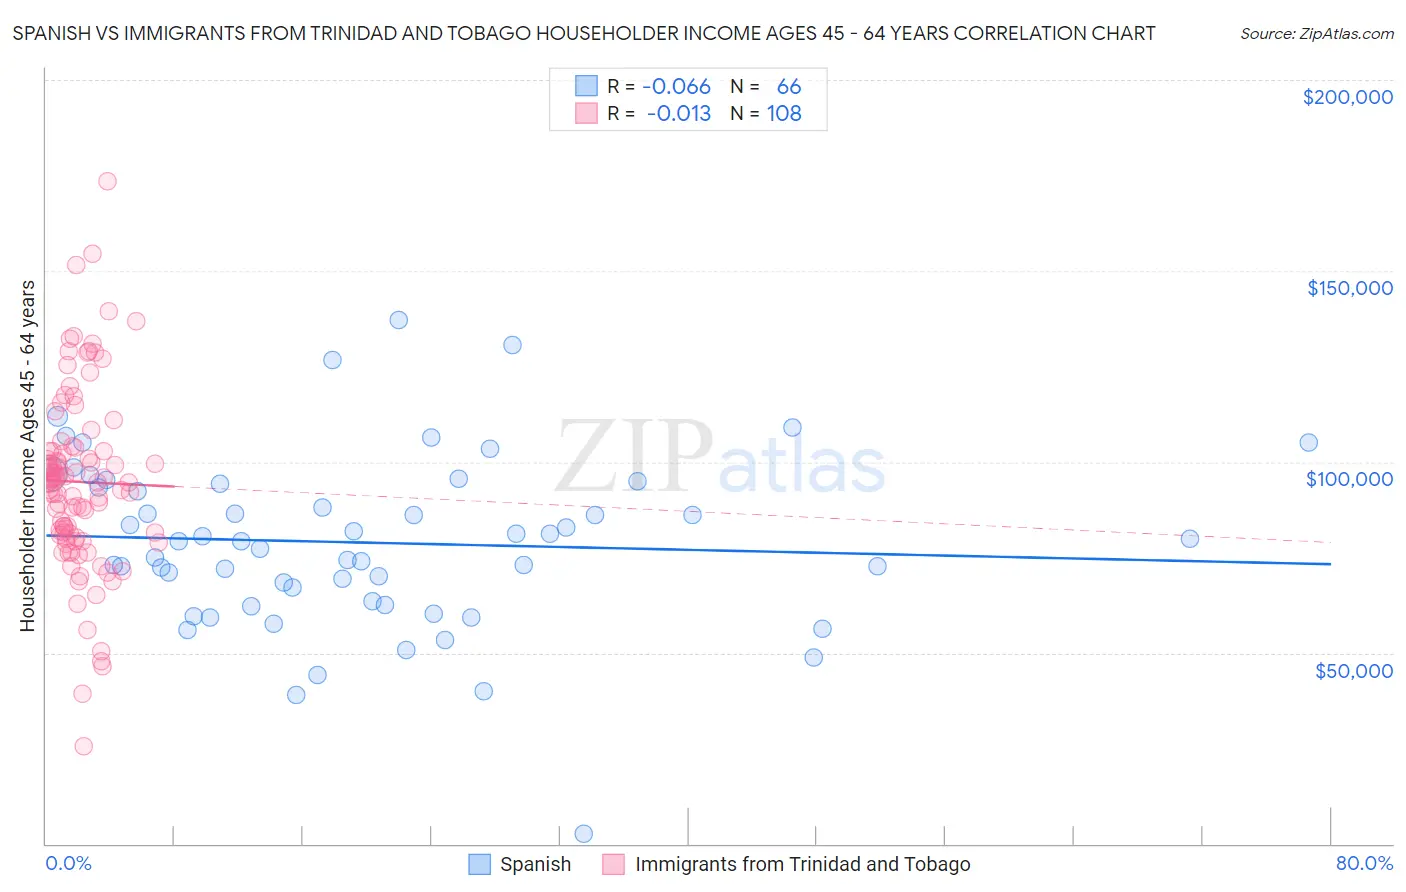 Spanish vs Immigrants from Trinidad and Tobago Householder Income Ages 45 - 64 years